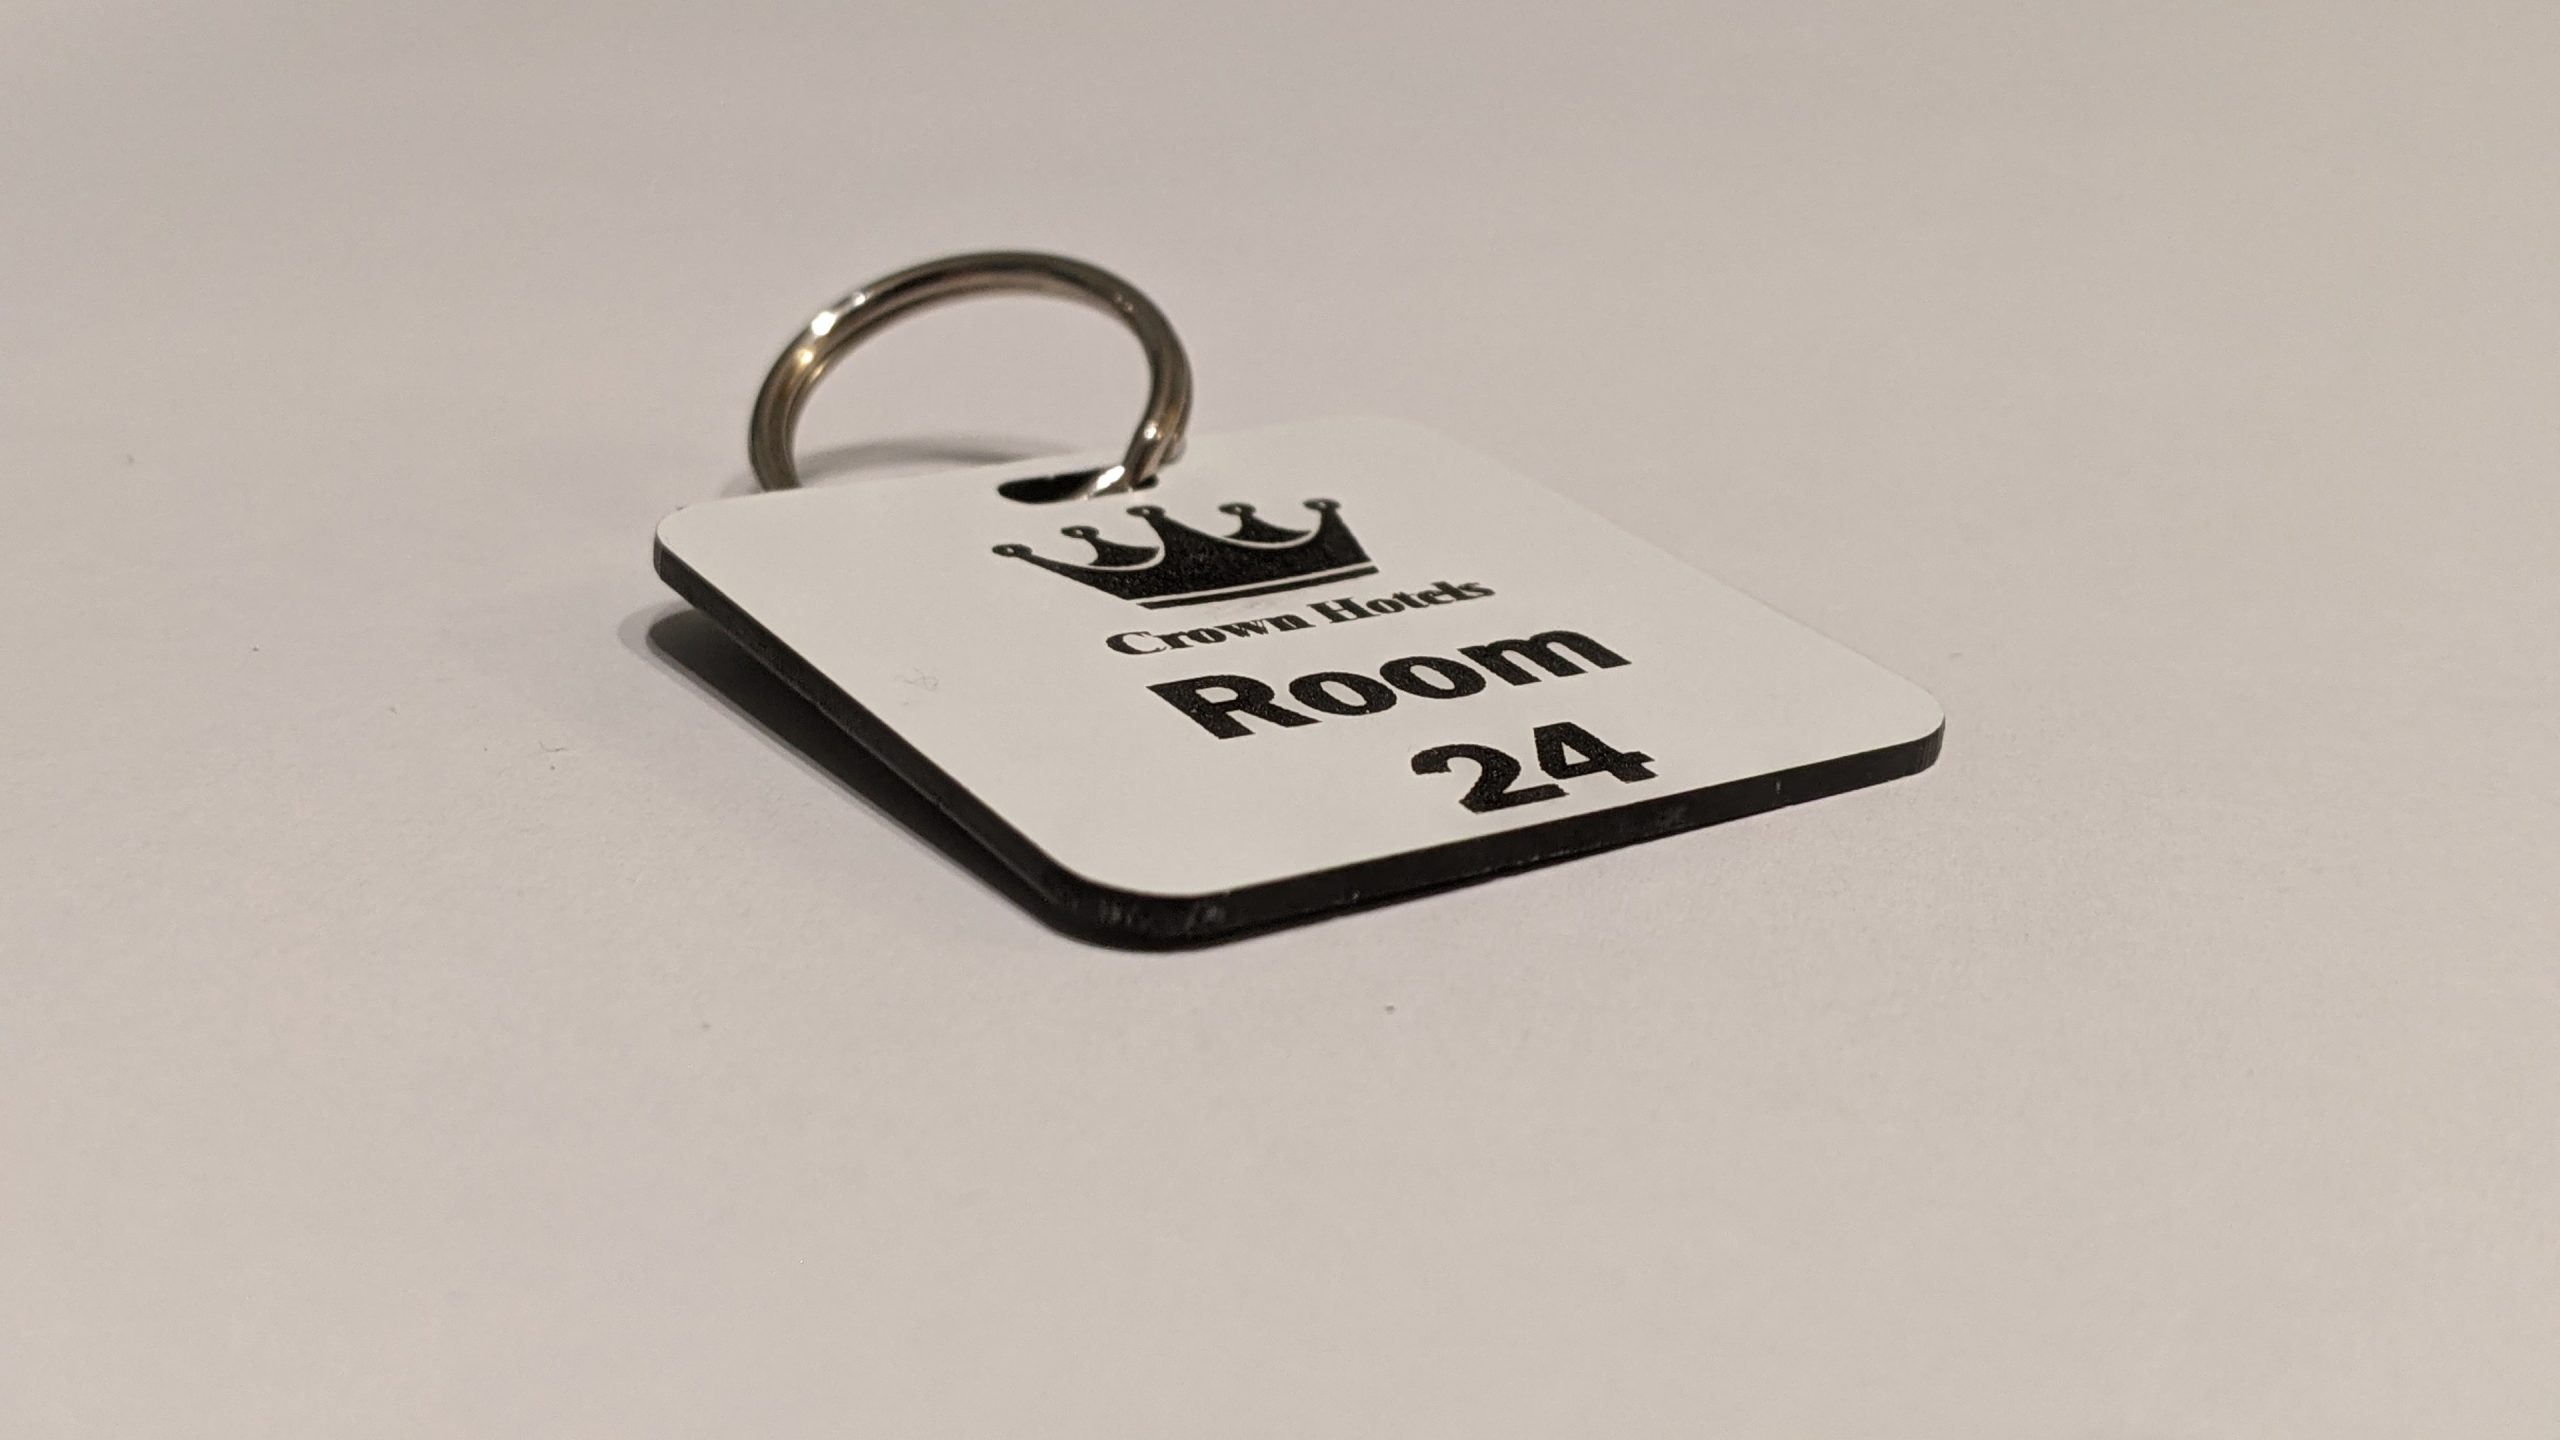 White keyring with black text showing a crown logo and a door number